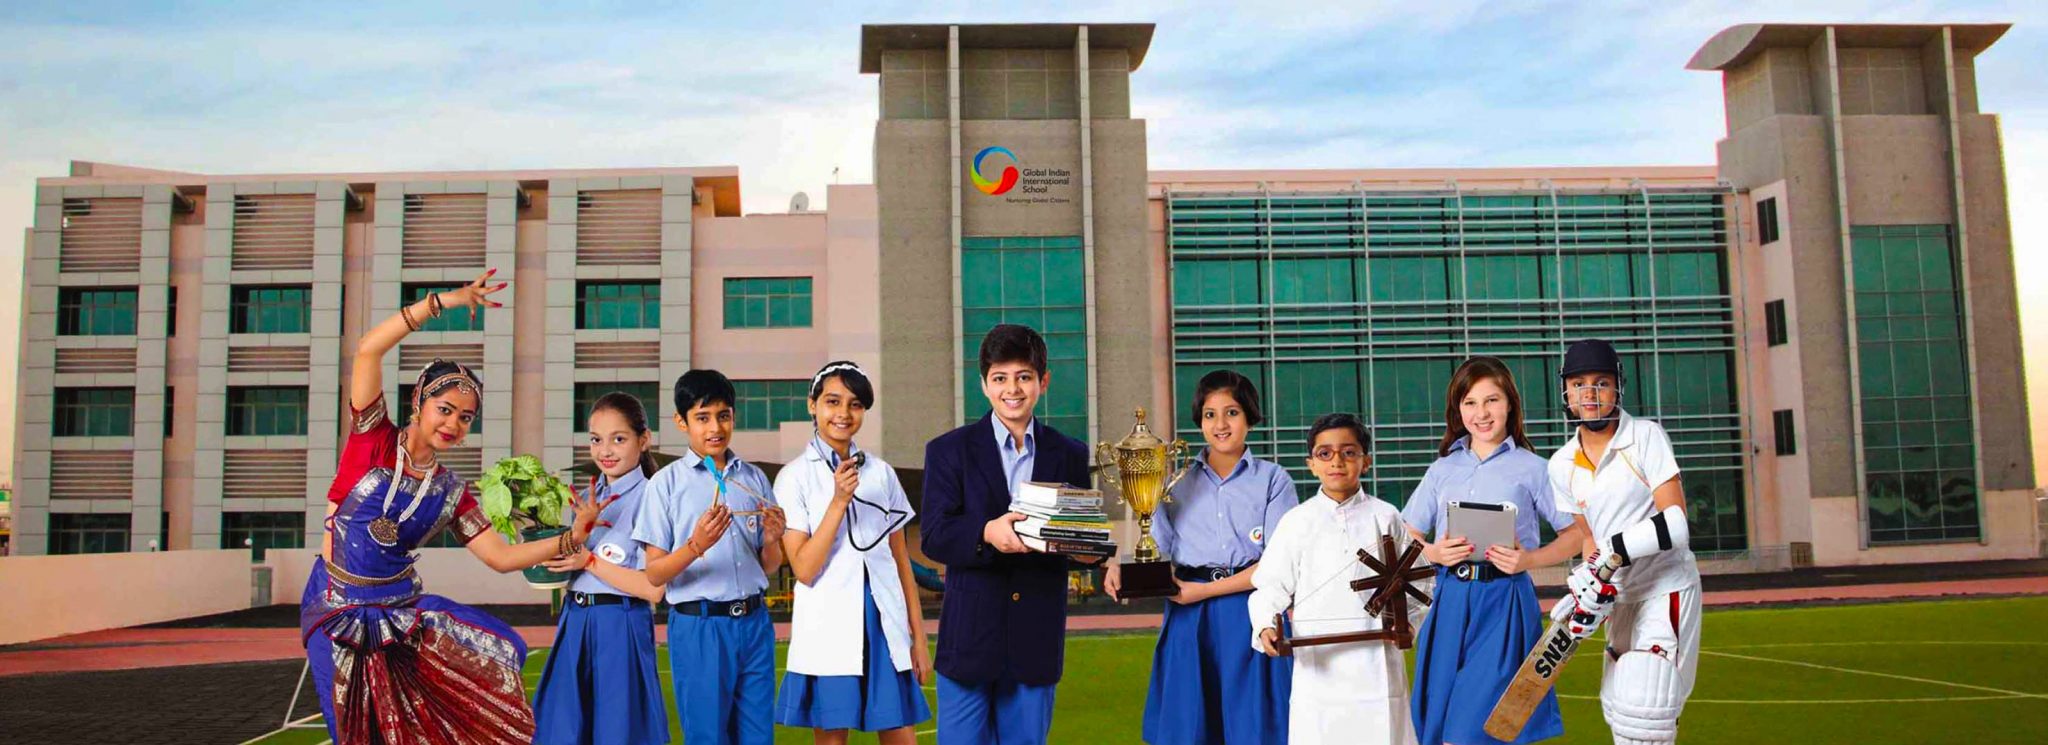 A rendered photograph of children outside the new Global Indian International School Dubai